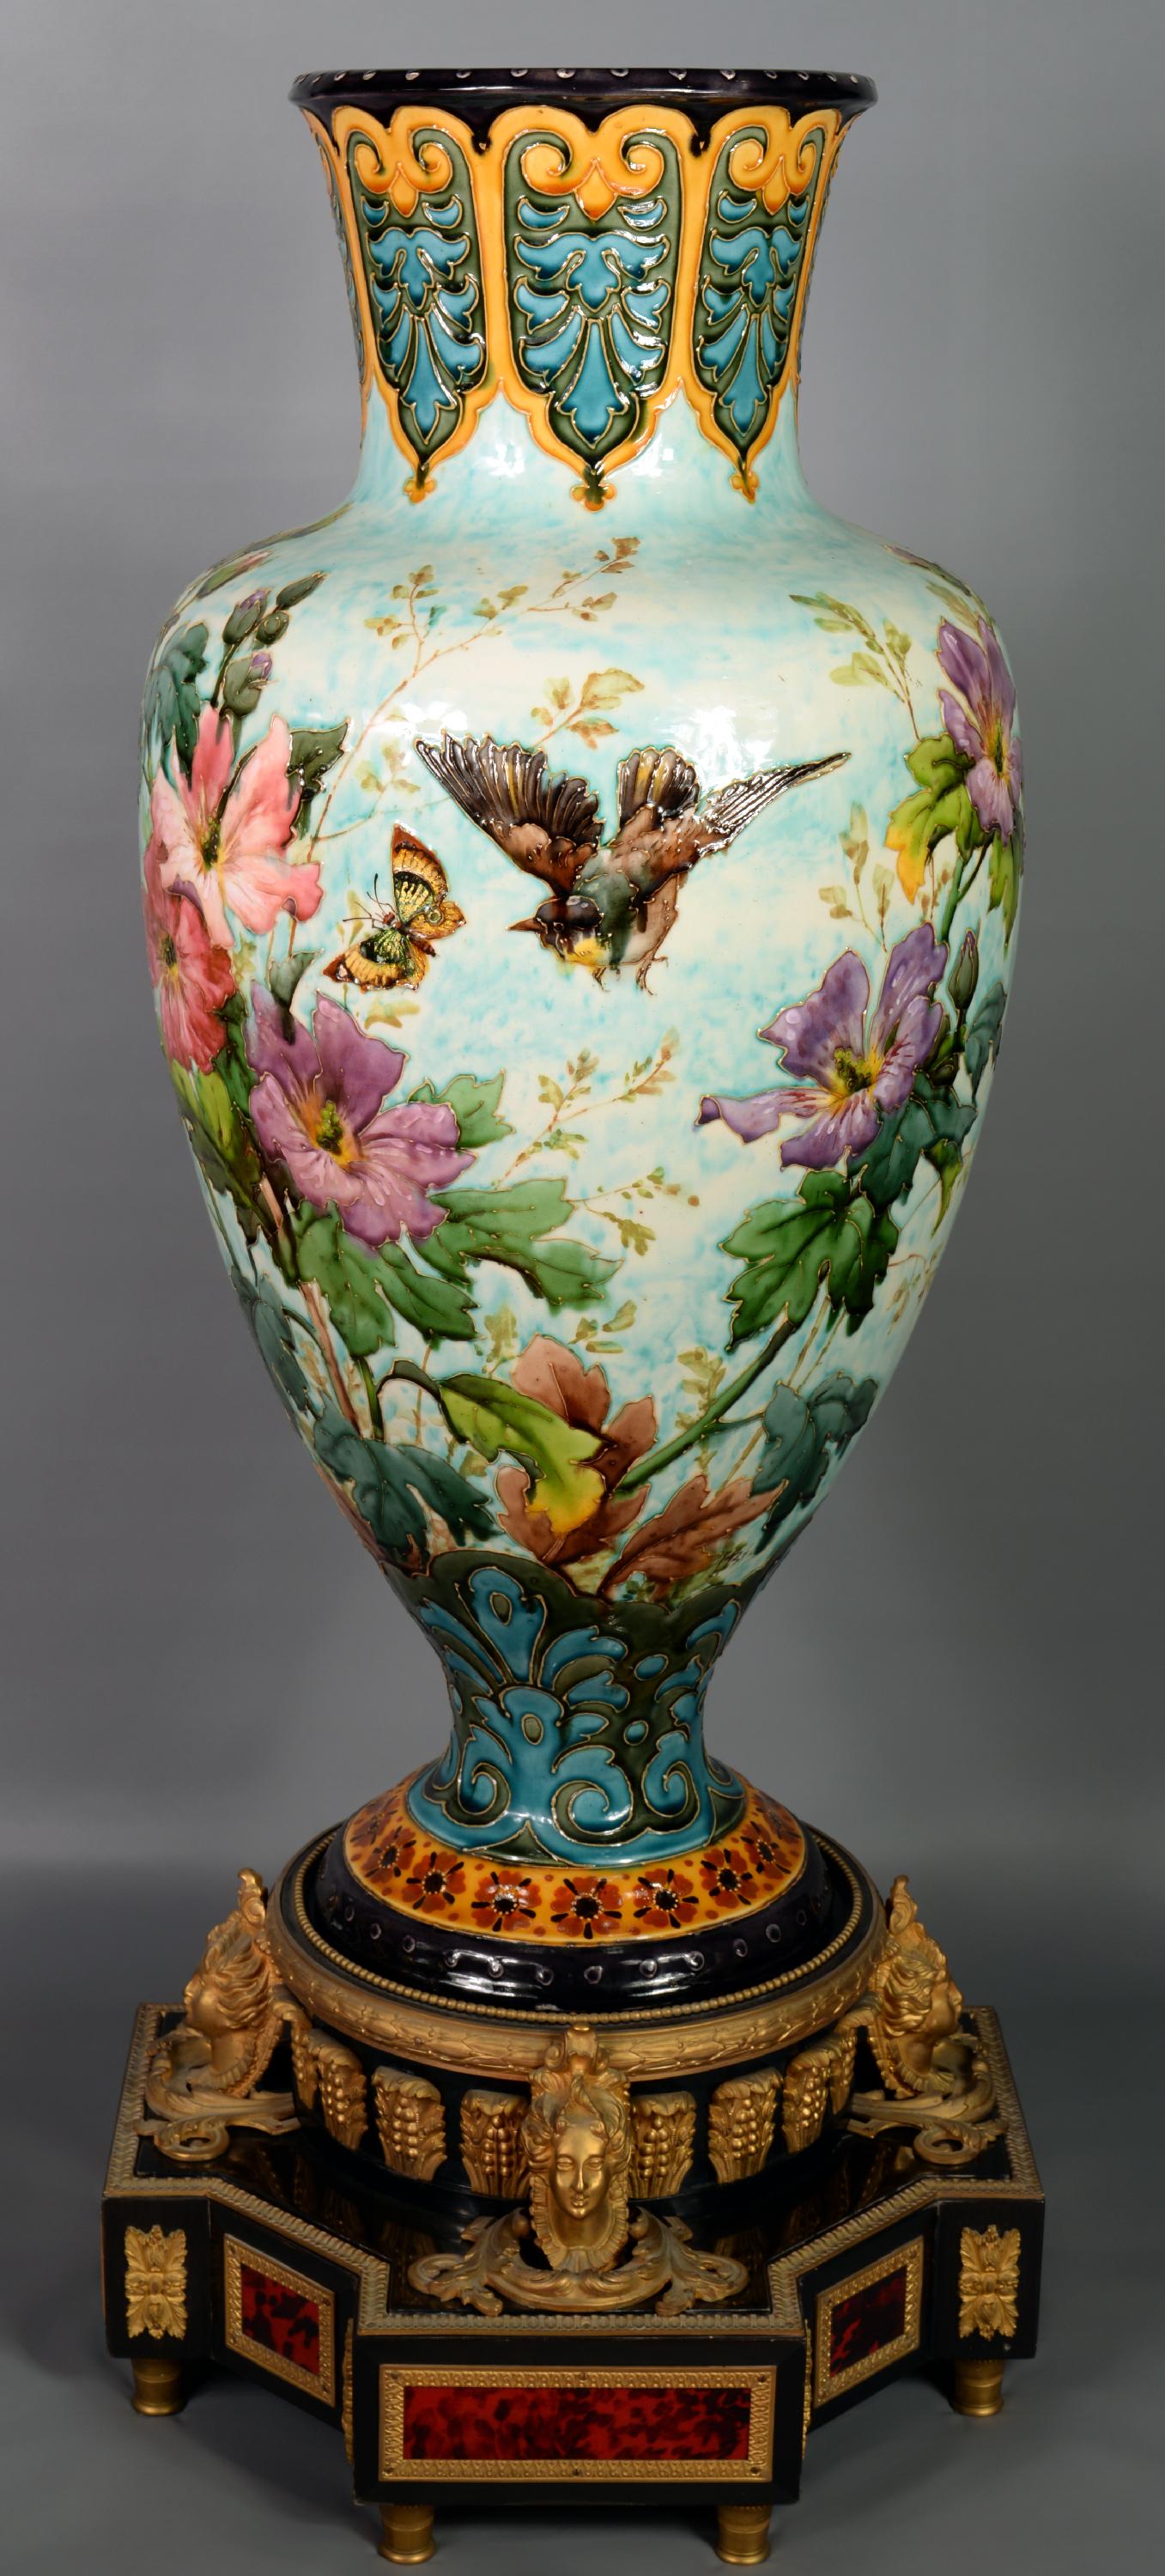 Painted Baluster Napoleon III Vase in Porcelain on a Base with Scales and Wood Veneer For Sale